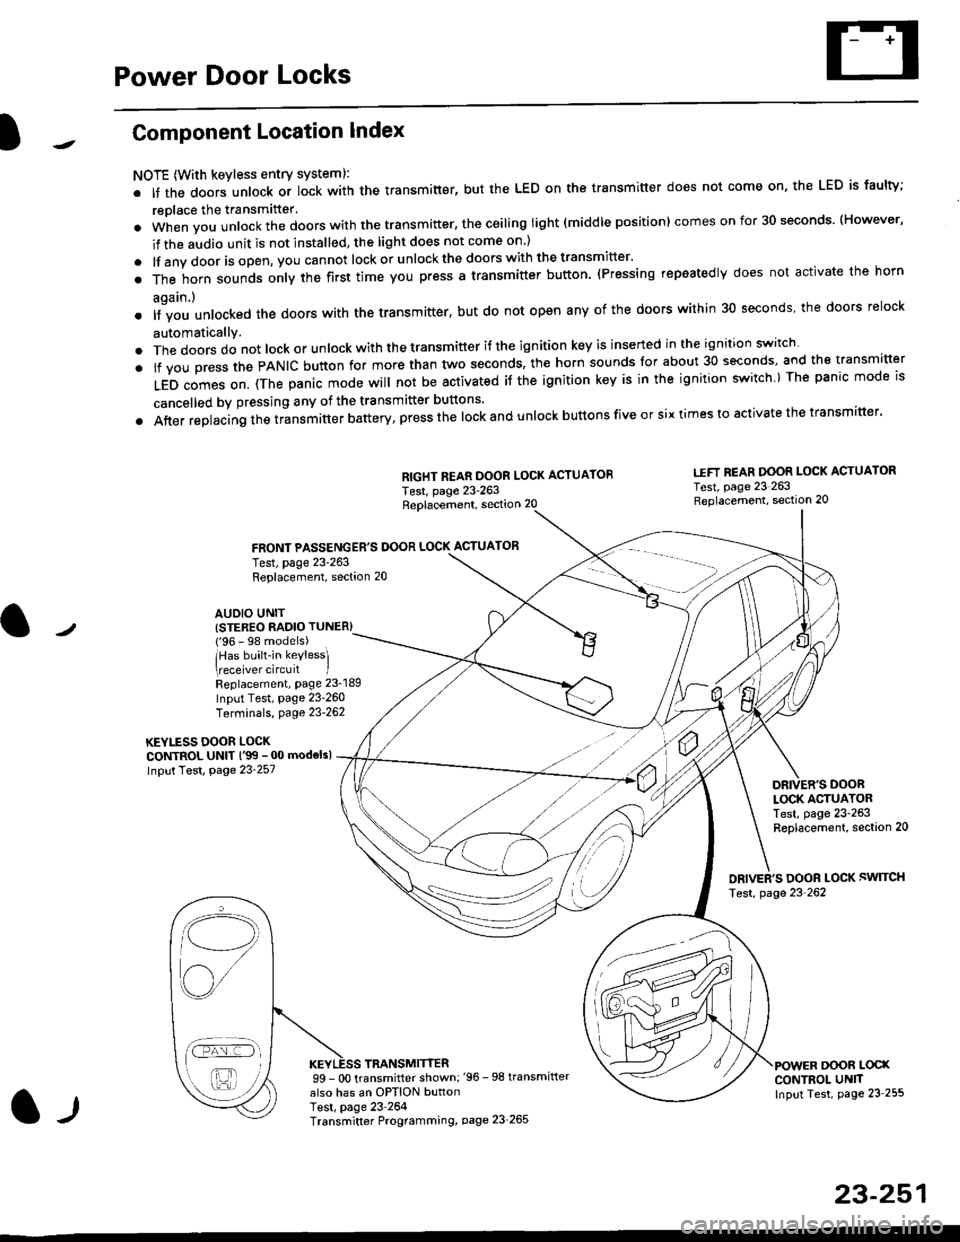 HONDA CIVIC 1998 6.G Workshop Manual Power Door Locks
Component Location Index
NOTE (With keyless entry systeml:
. It the doors unlock or lock with the transmitter, but the LED on the transmitter does not come on, the LED is faulty;
repl